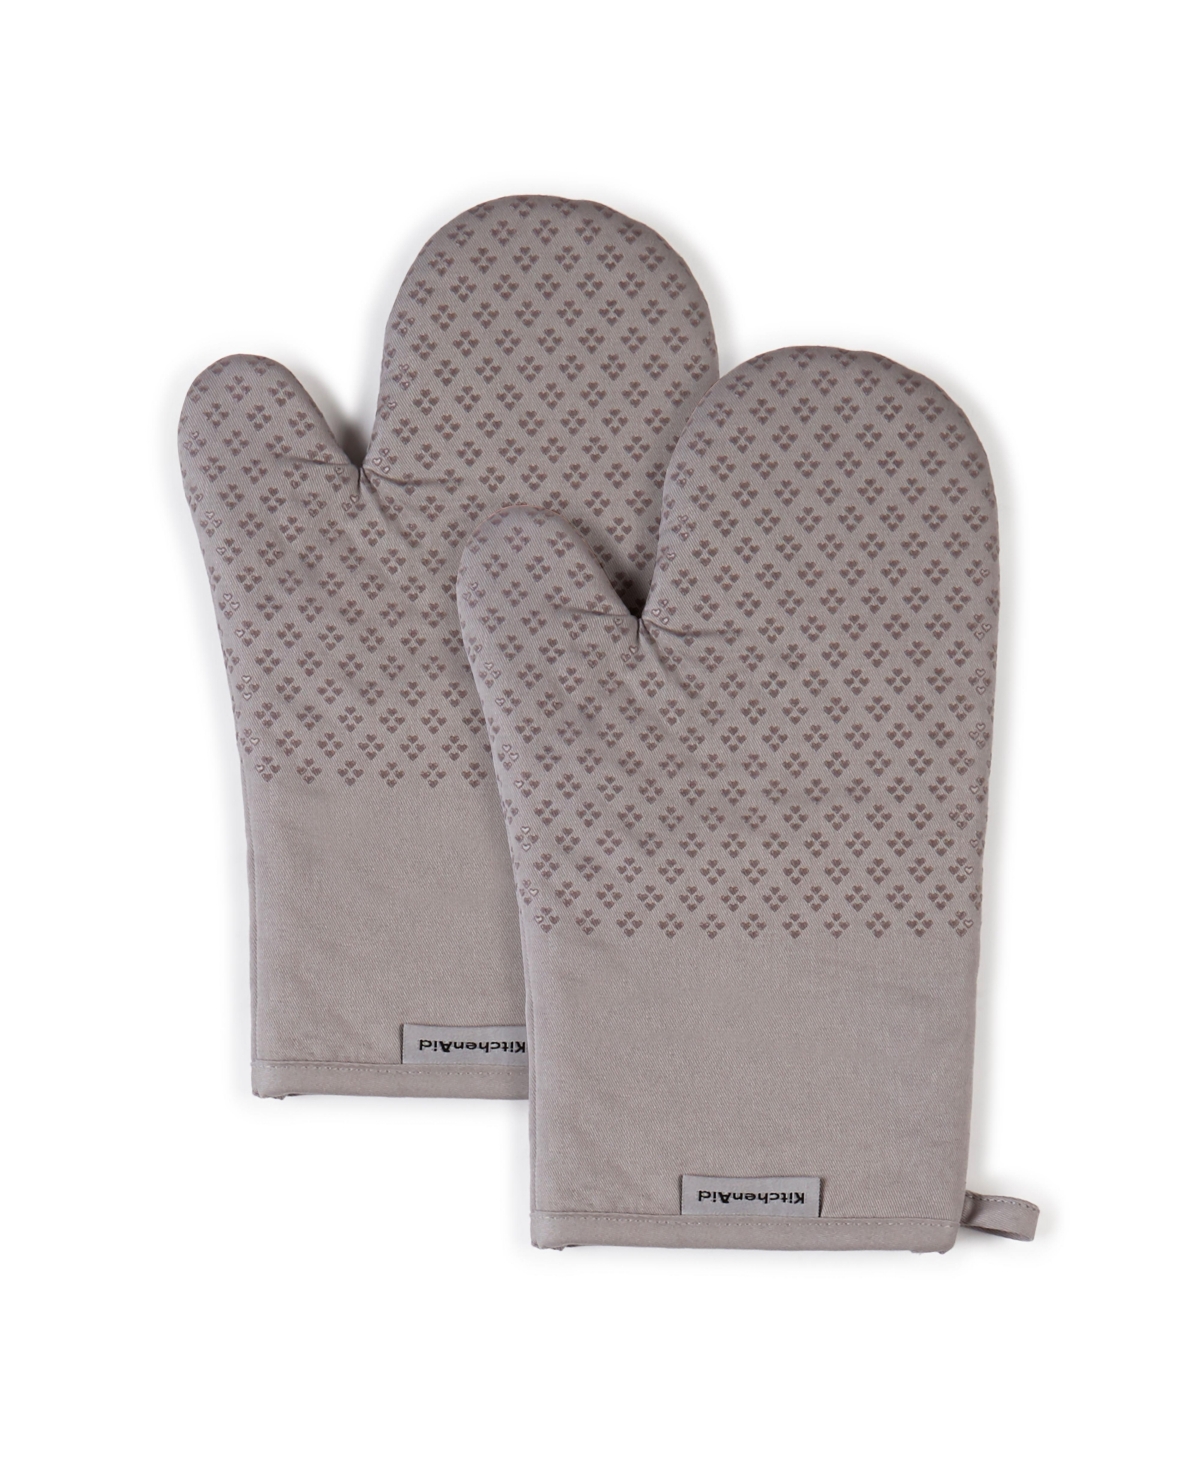 Asteroid Oven Mitts, 7"x 12.5", Set of 2 - Blue Willow